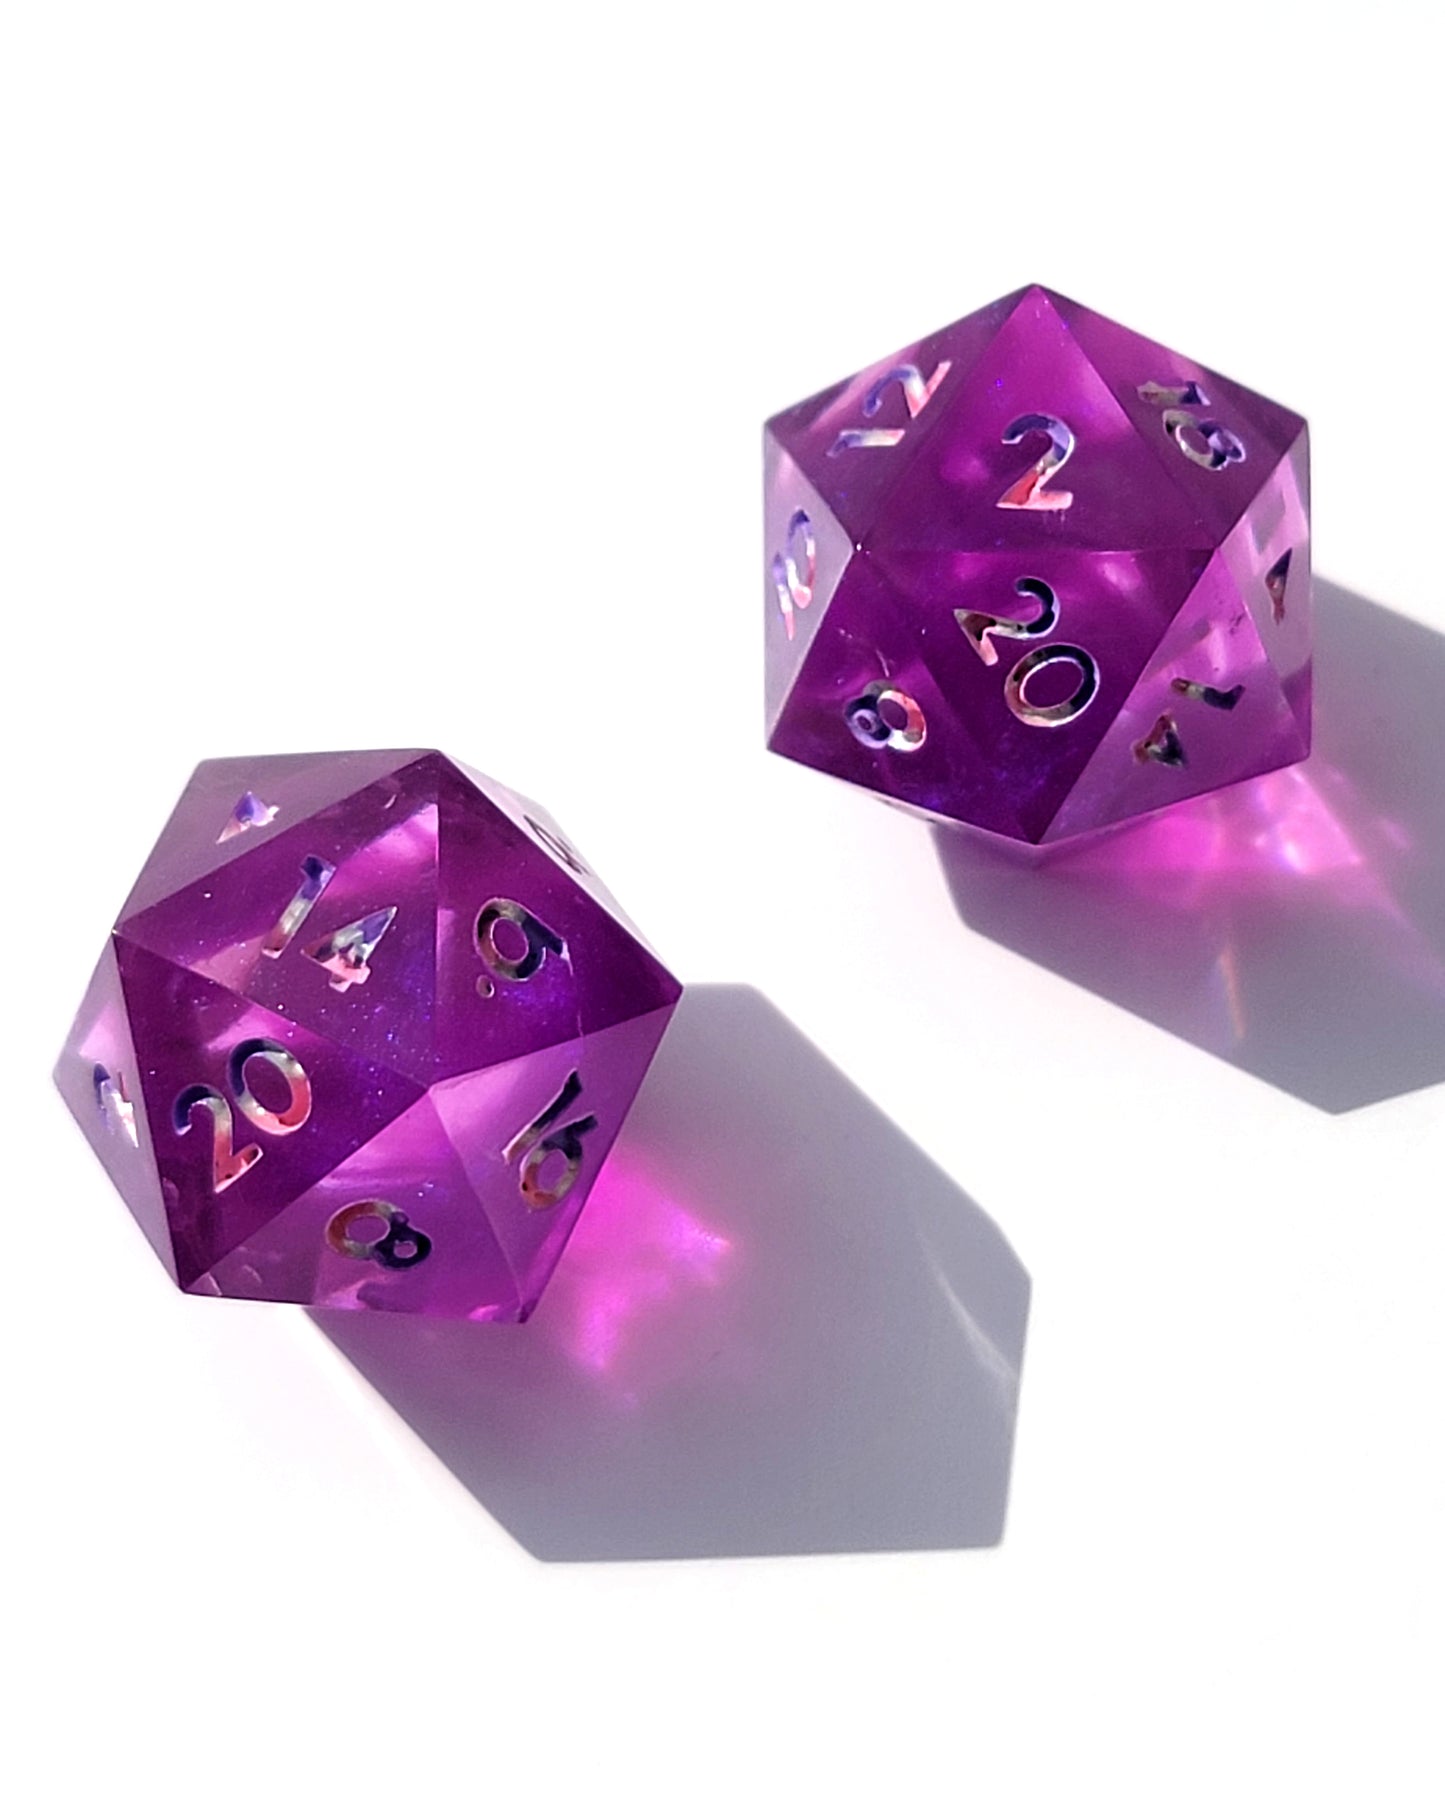 D20 D&D Dice| Hand Crafted Dungeons and Dragons Dice